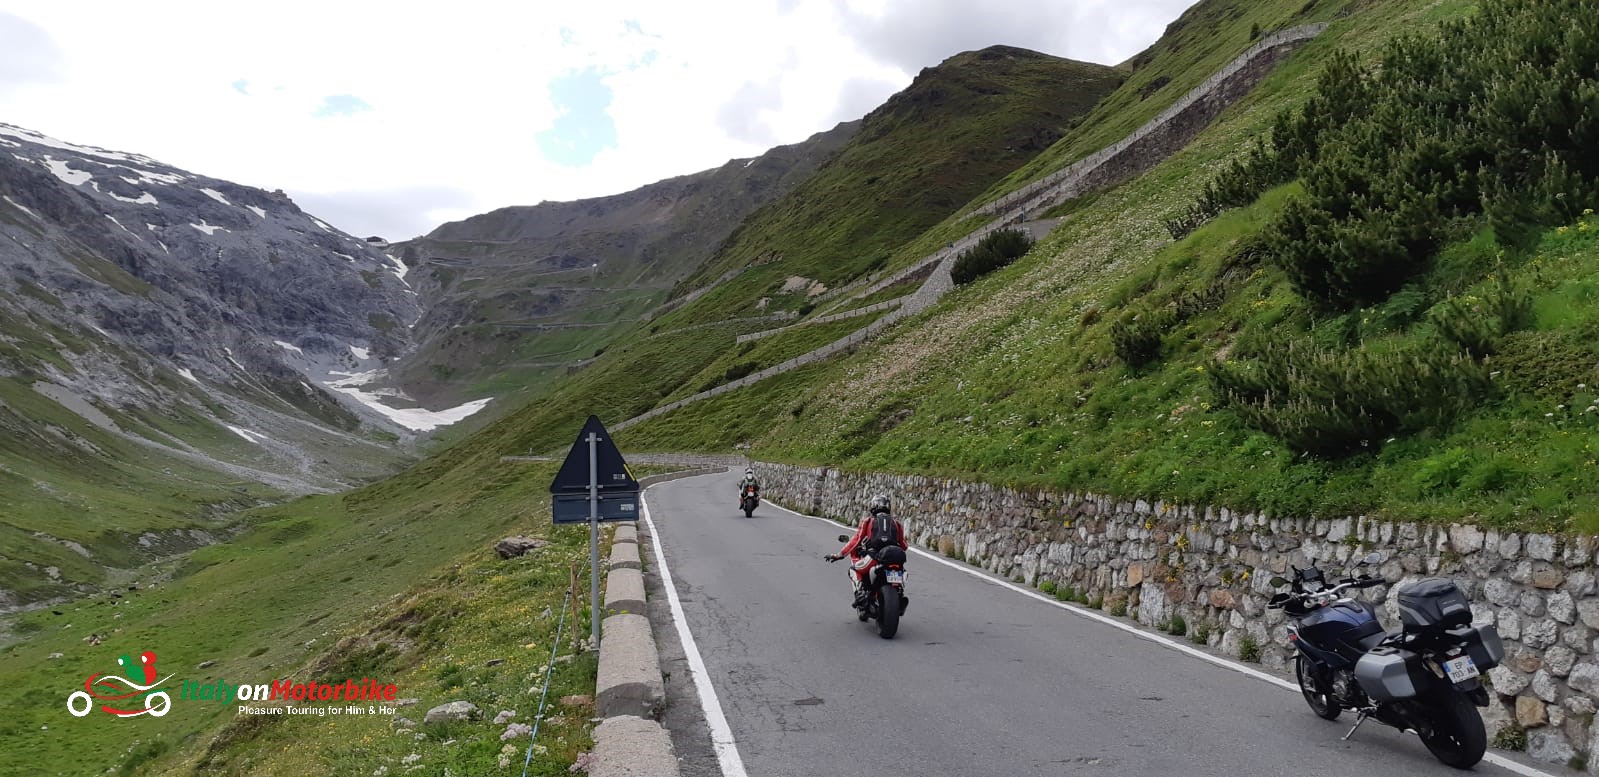 Biker's salute at the bottom of the Stelvio pass on our motorcycle tour of the Alps